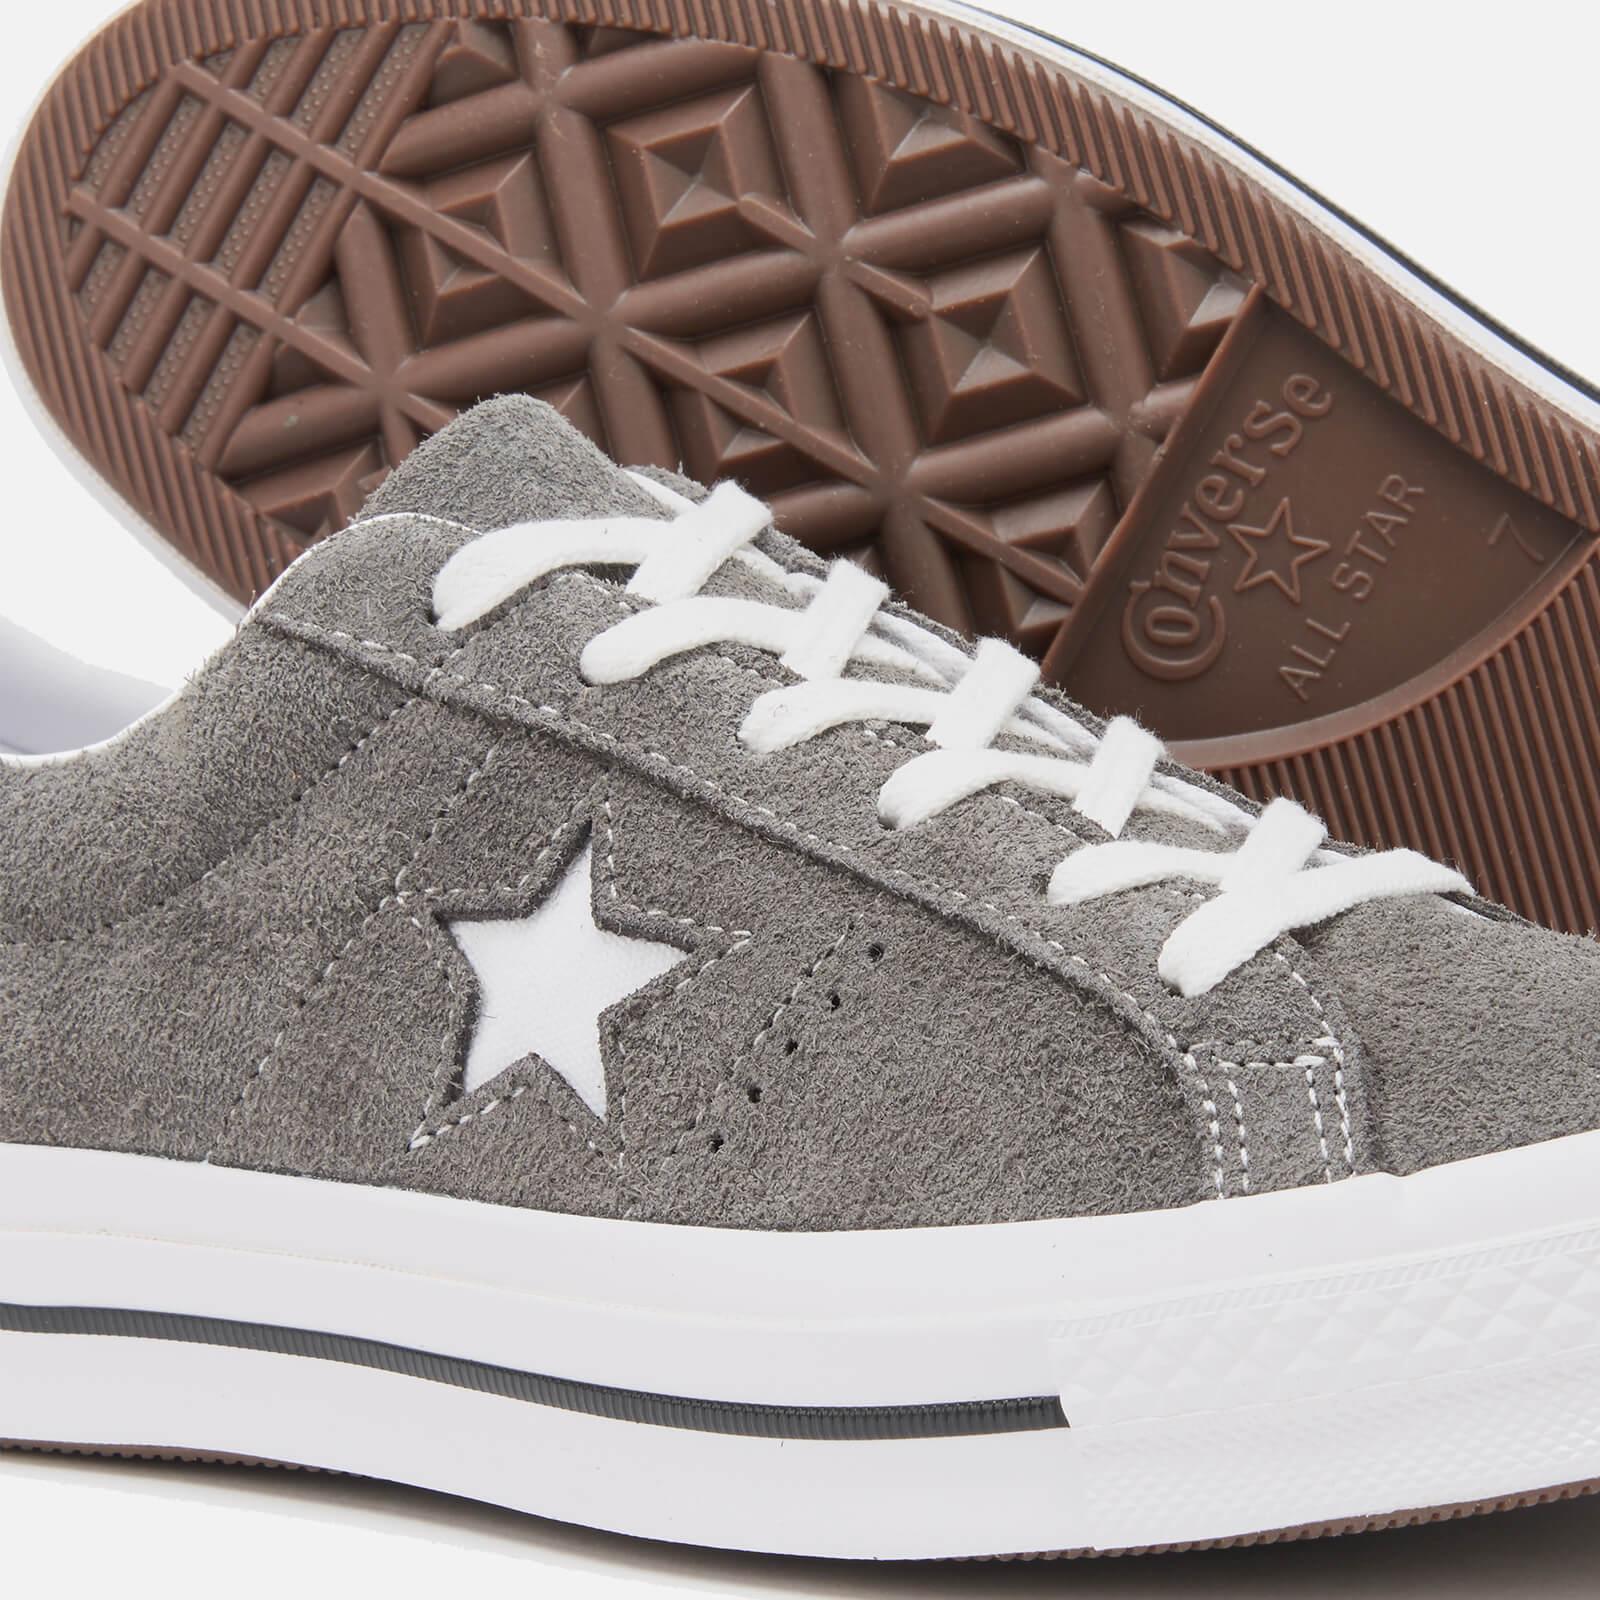 Converse One Star Vintage Suede Ox Women's Shoes (trainers) In ... عدد طبقات الجلد